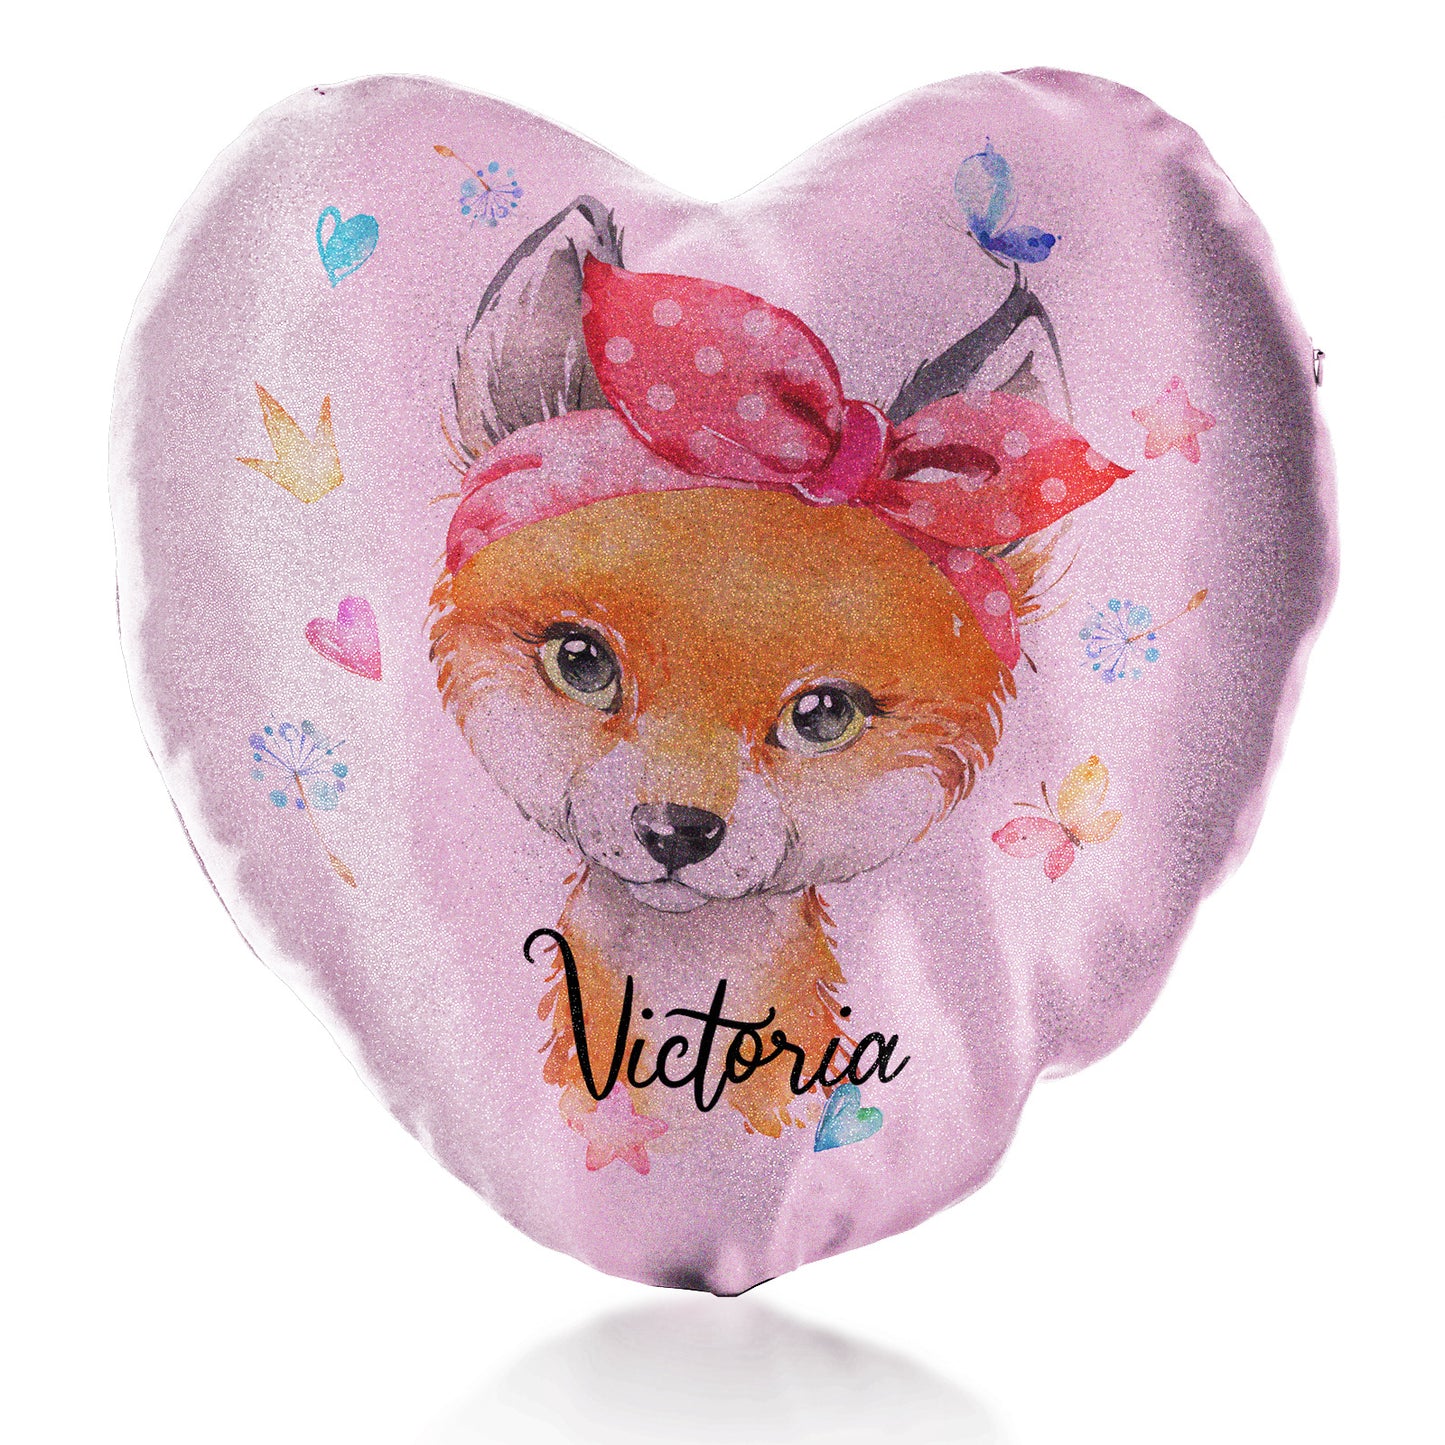 Personalised Glitter Heart Cushion with Red Fox with Hearts Dandelion Butterflies and Cute Text